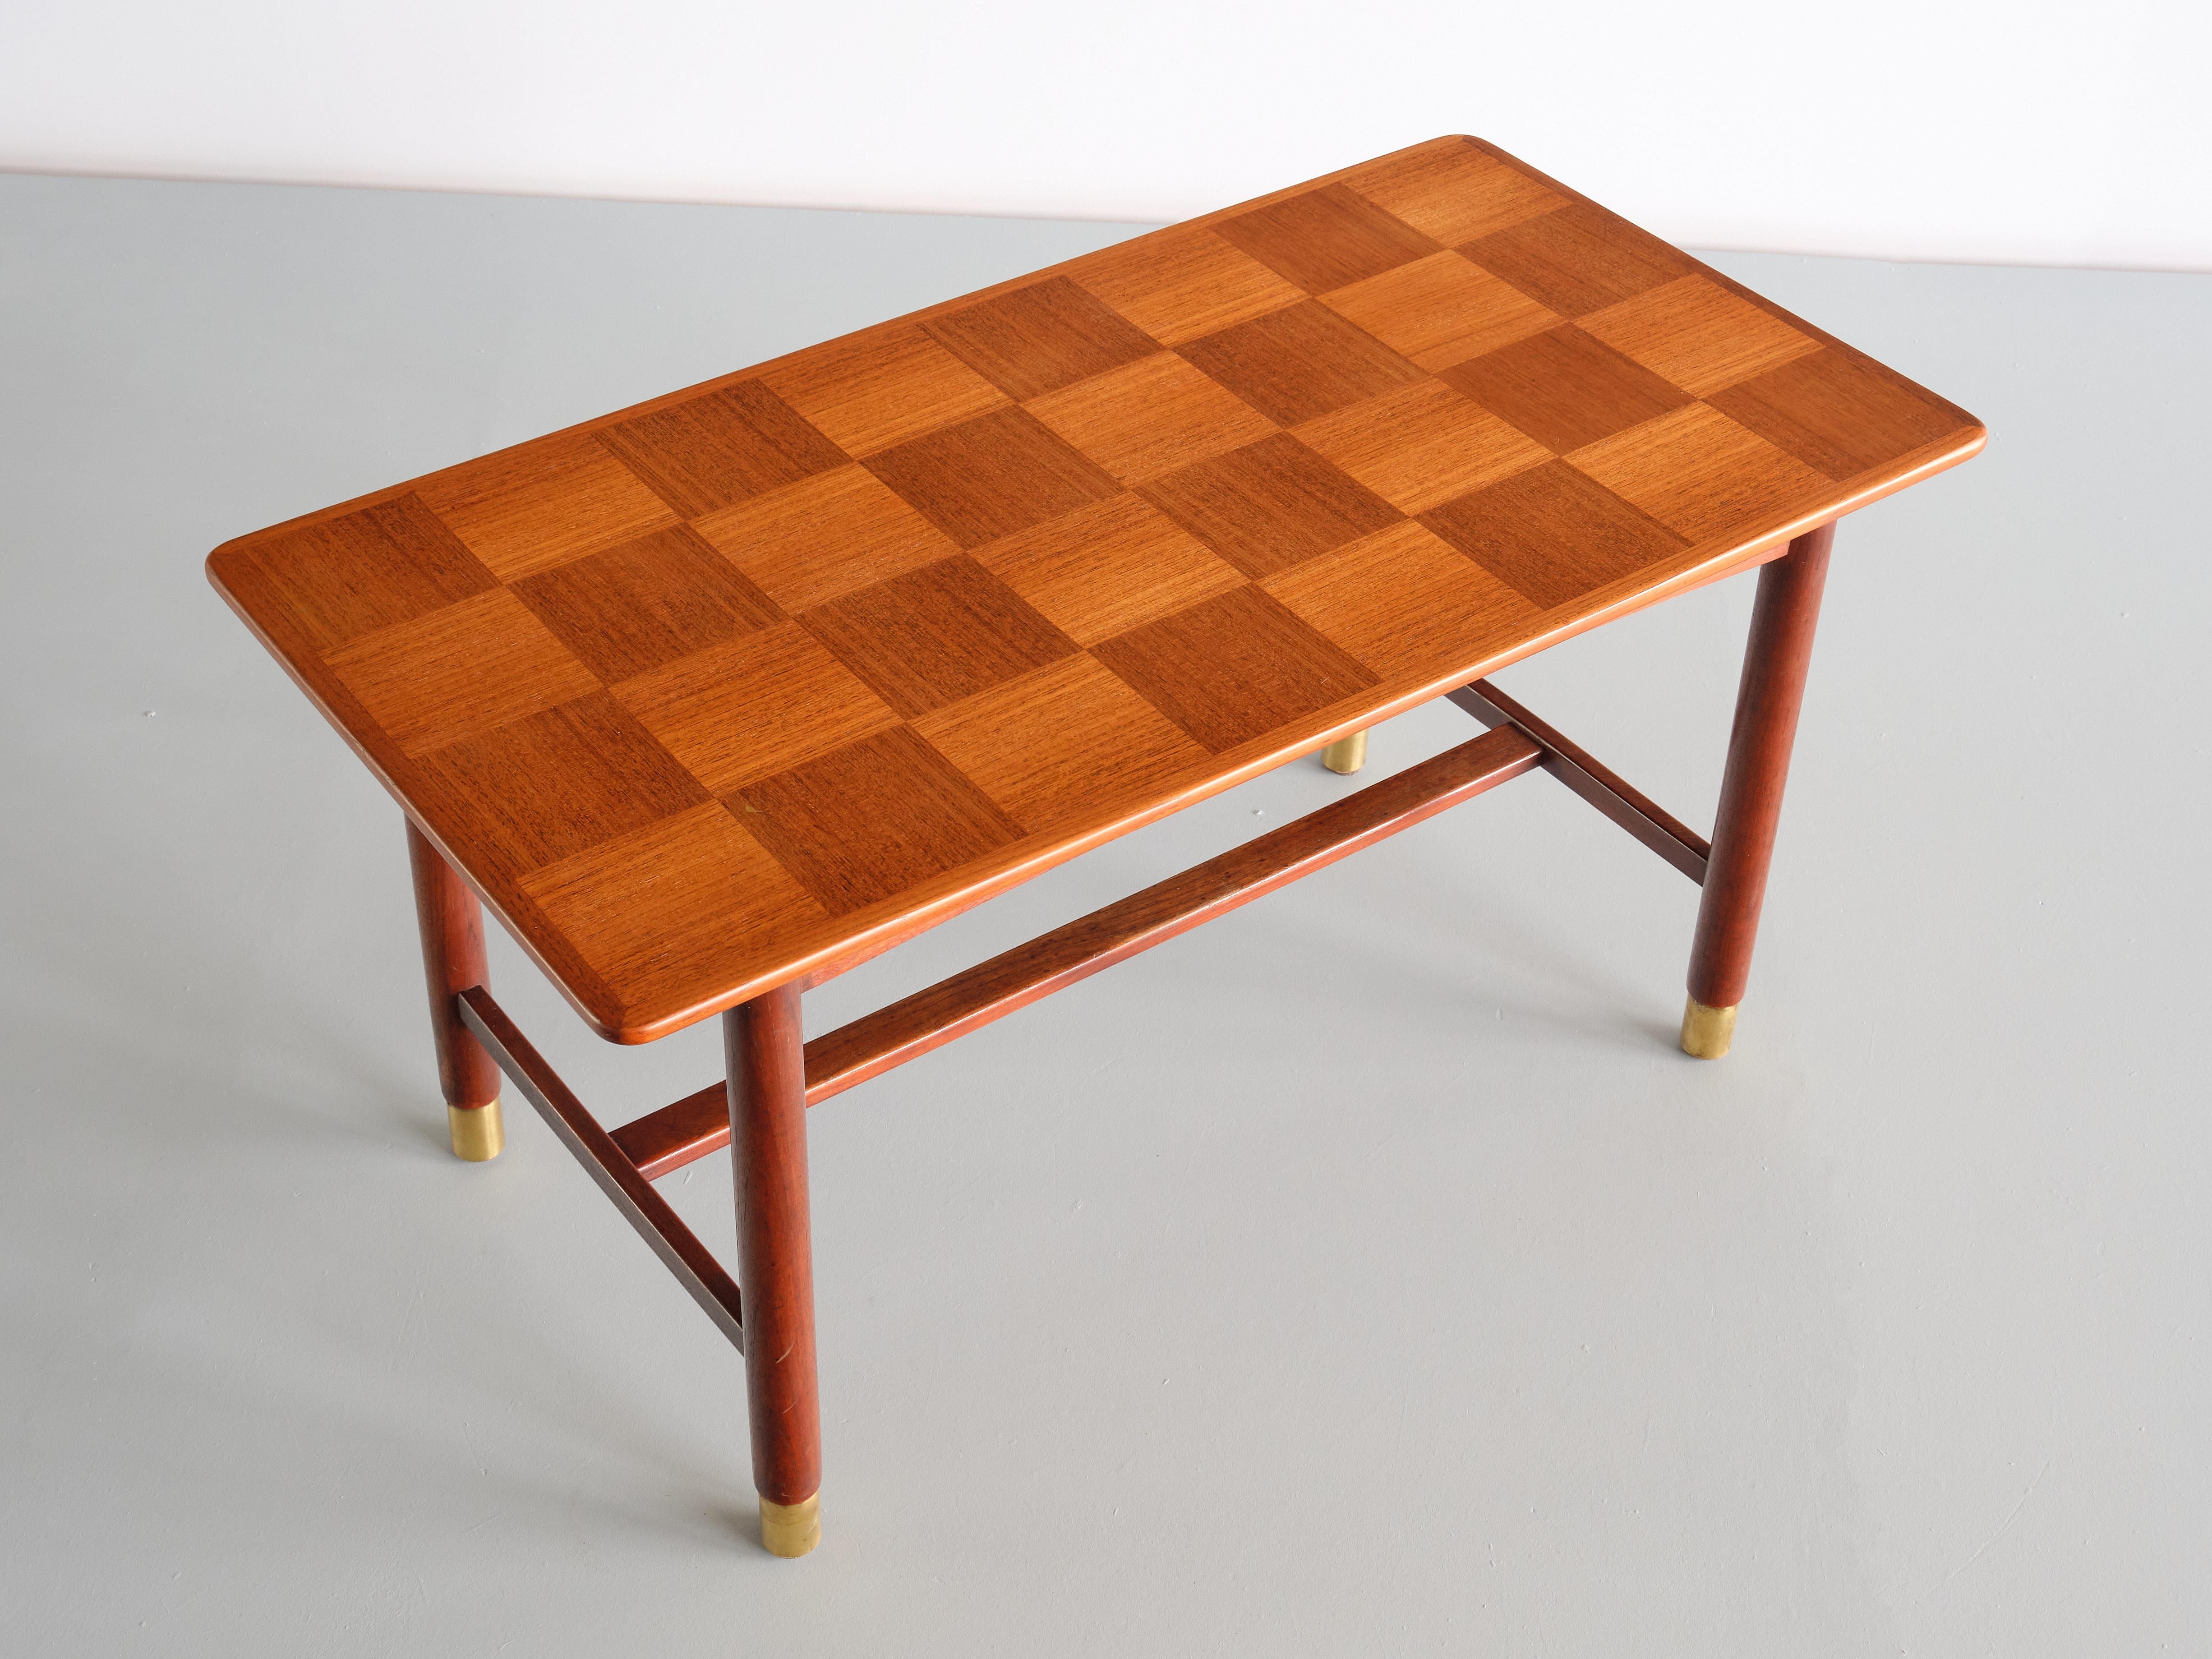 Scandinavian Modern Carl Axel Acking Coffee Table in Teak and Brass, SMF Bodafors, Sweden, 1950s For Sale